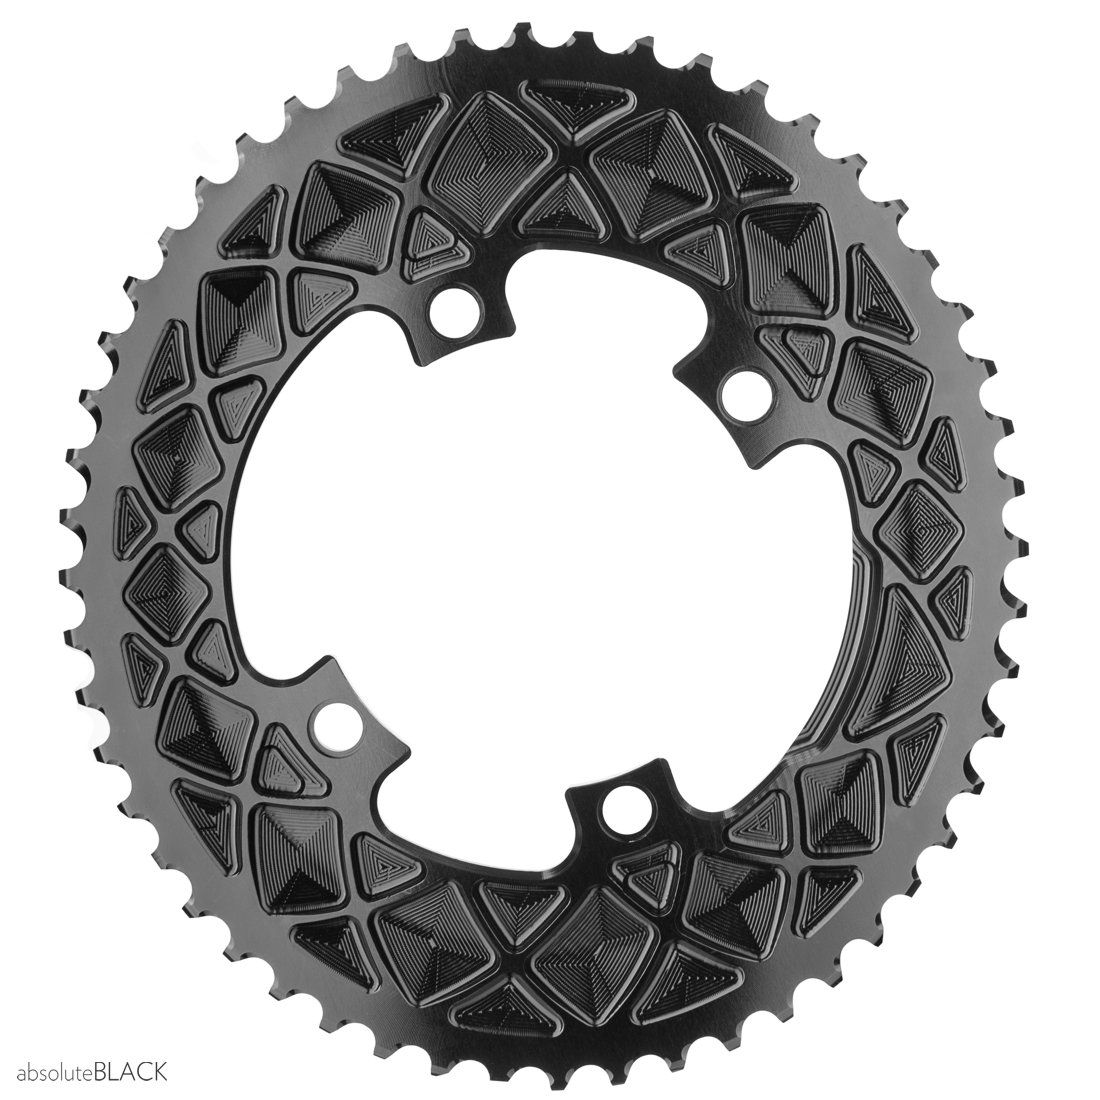 ABSOLUTE BLACK Chainring Absoluteblack Oval 110Mm 46T 4B 2X 9100 Gy 